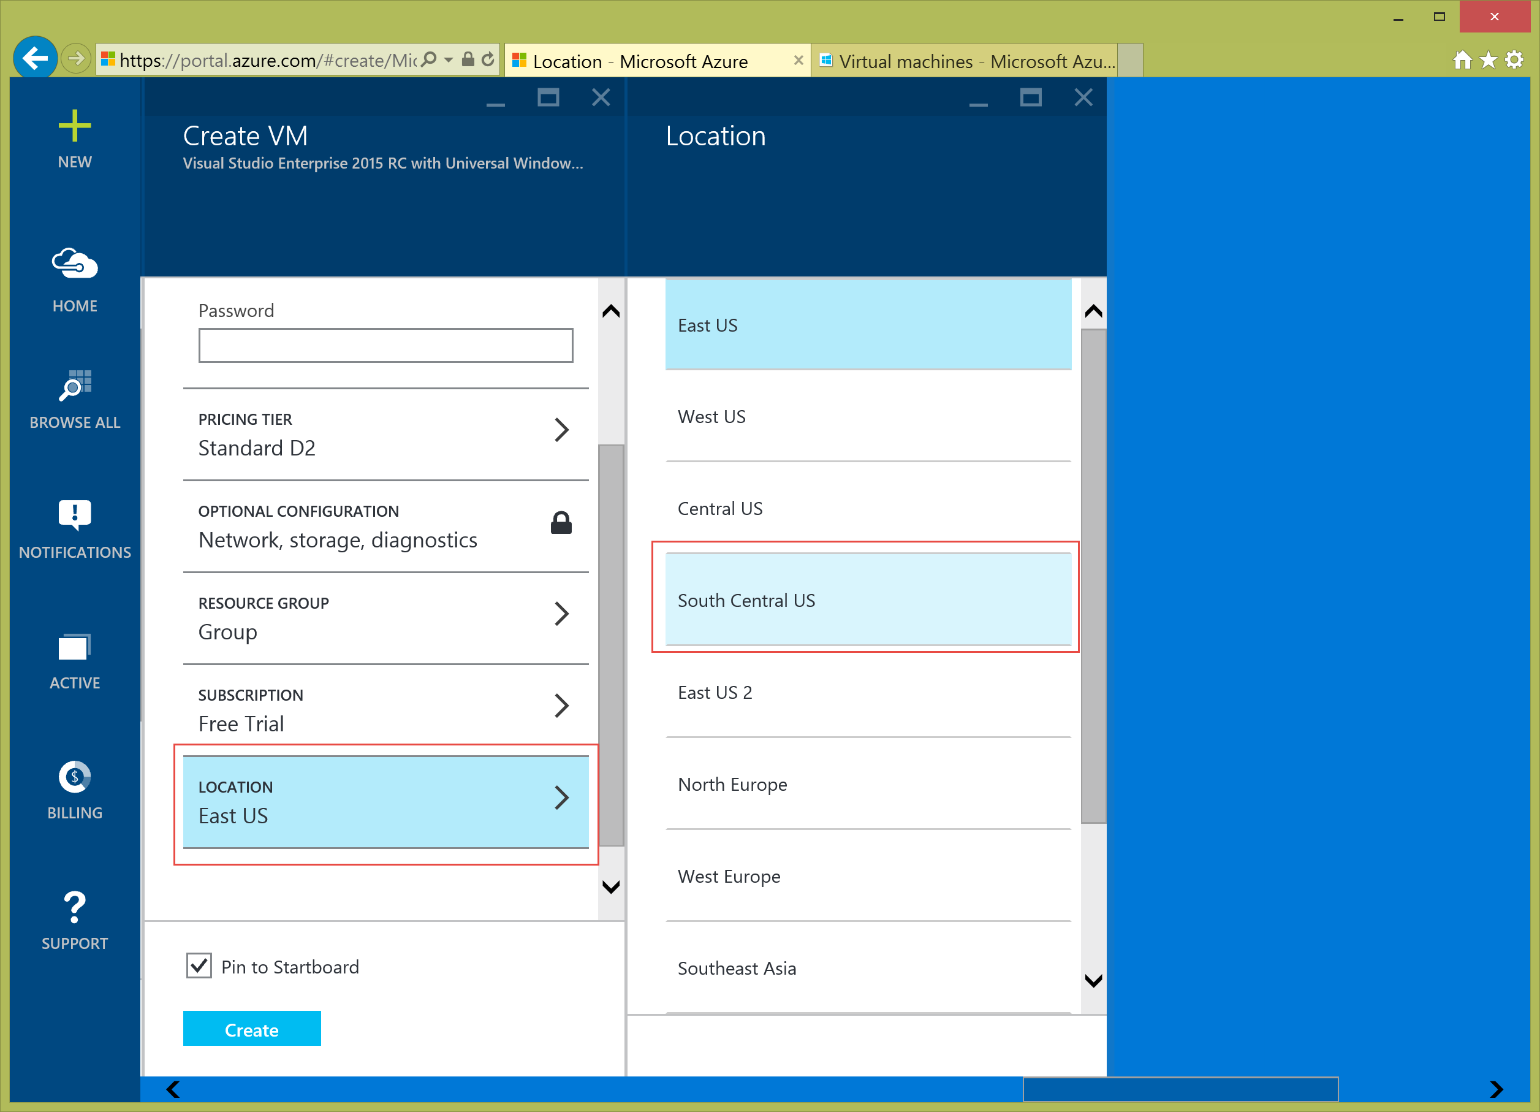 Figure 4: Choosing a Region is the most important choice to be made when creating resources in Azure.